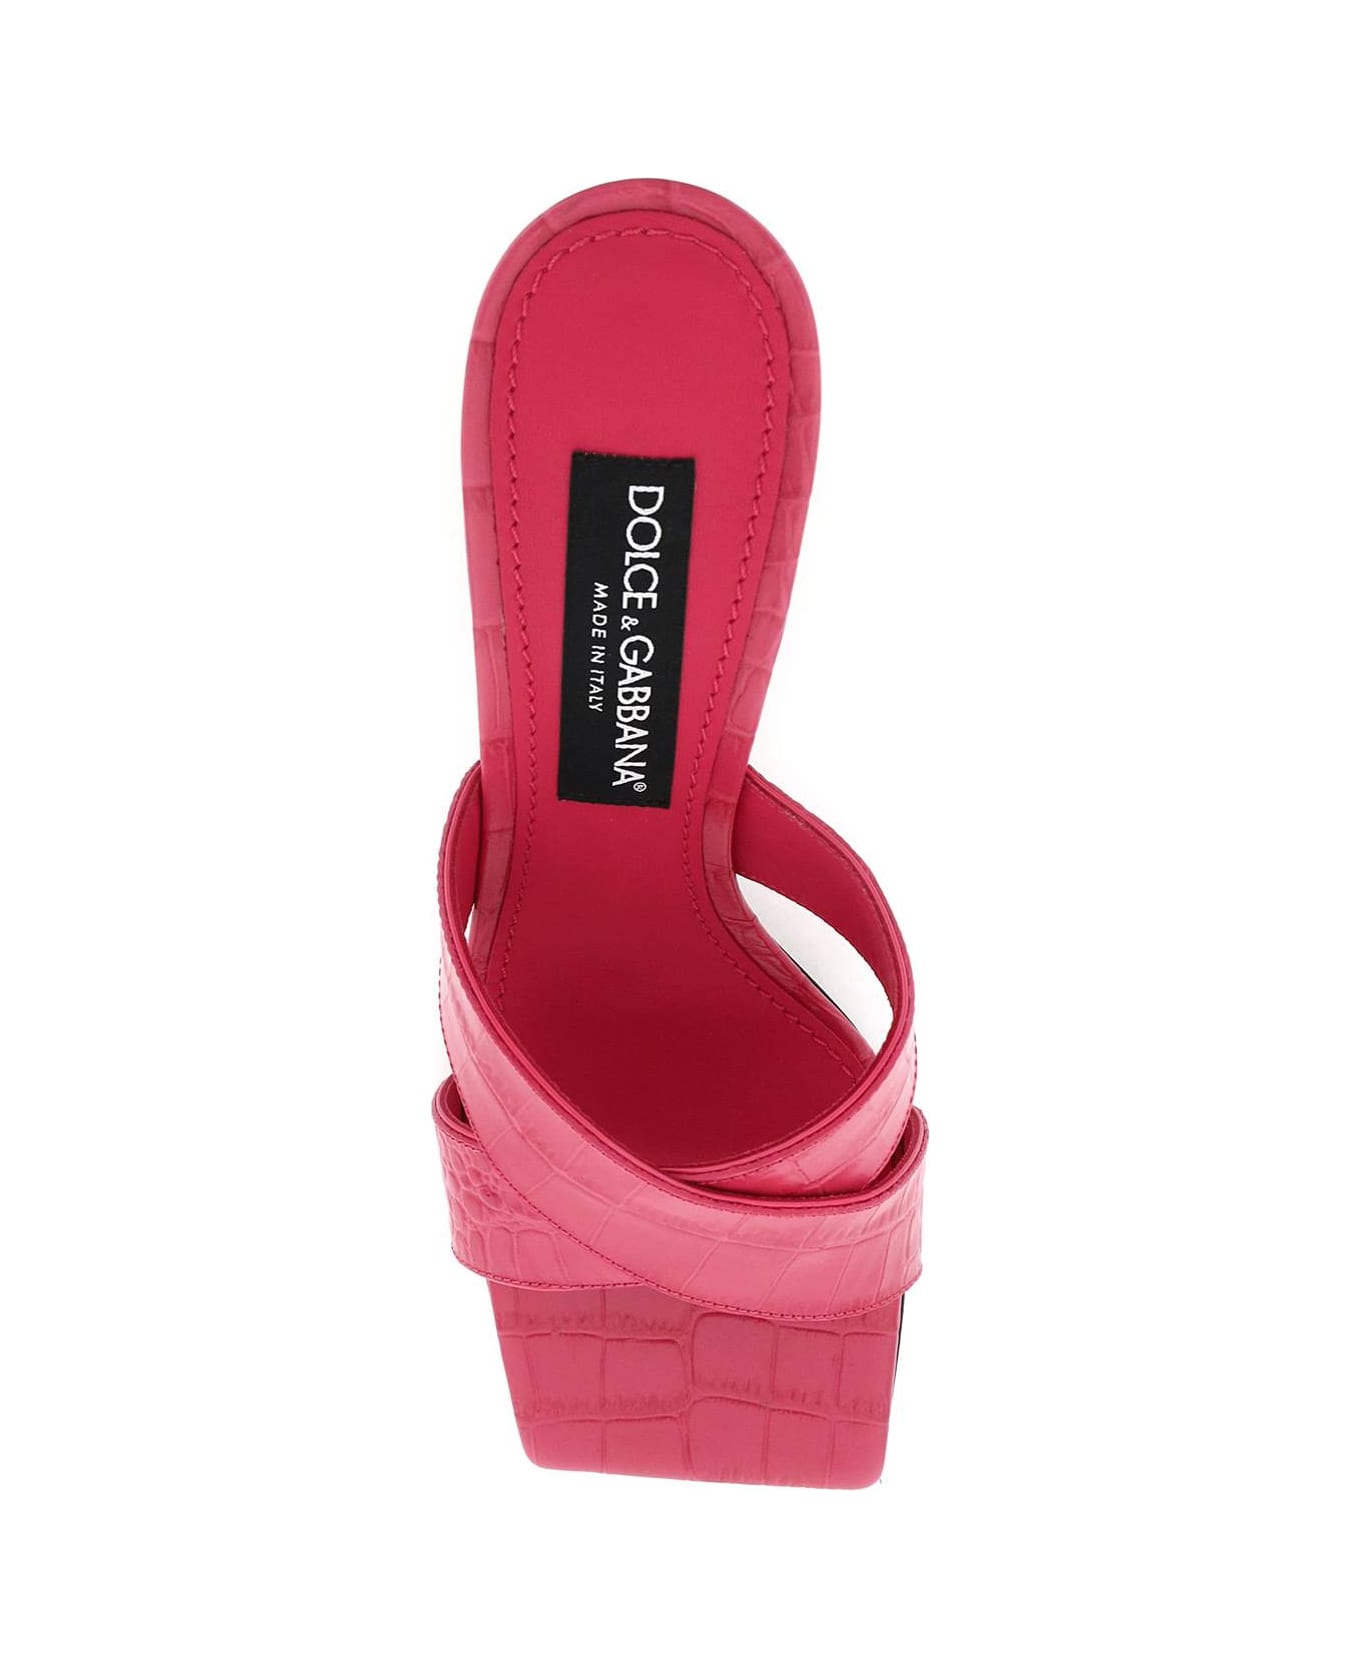 Dolce & Gabbana Logo Plaque Embossed Mules - Pink